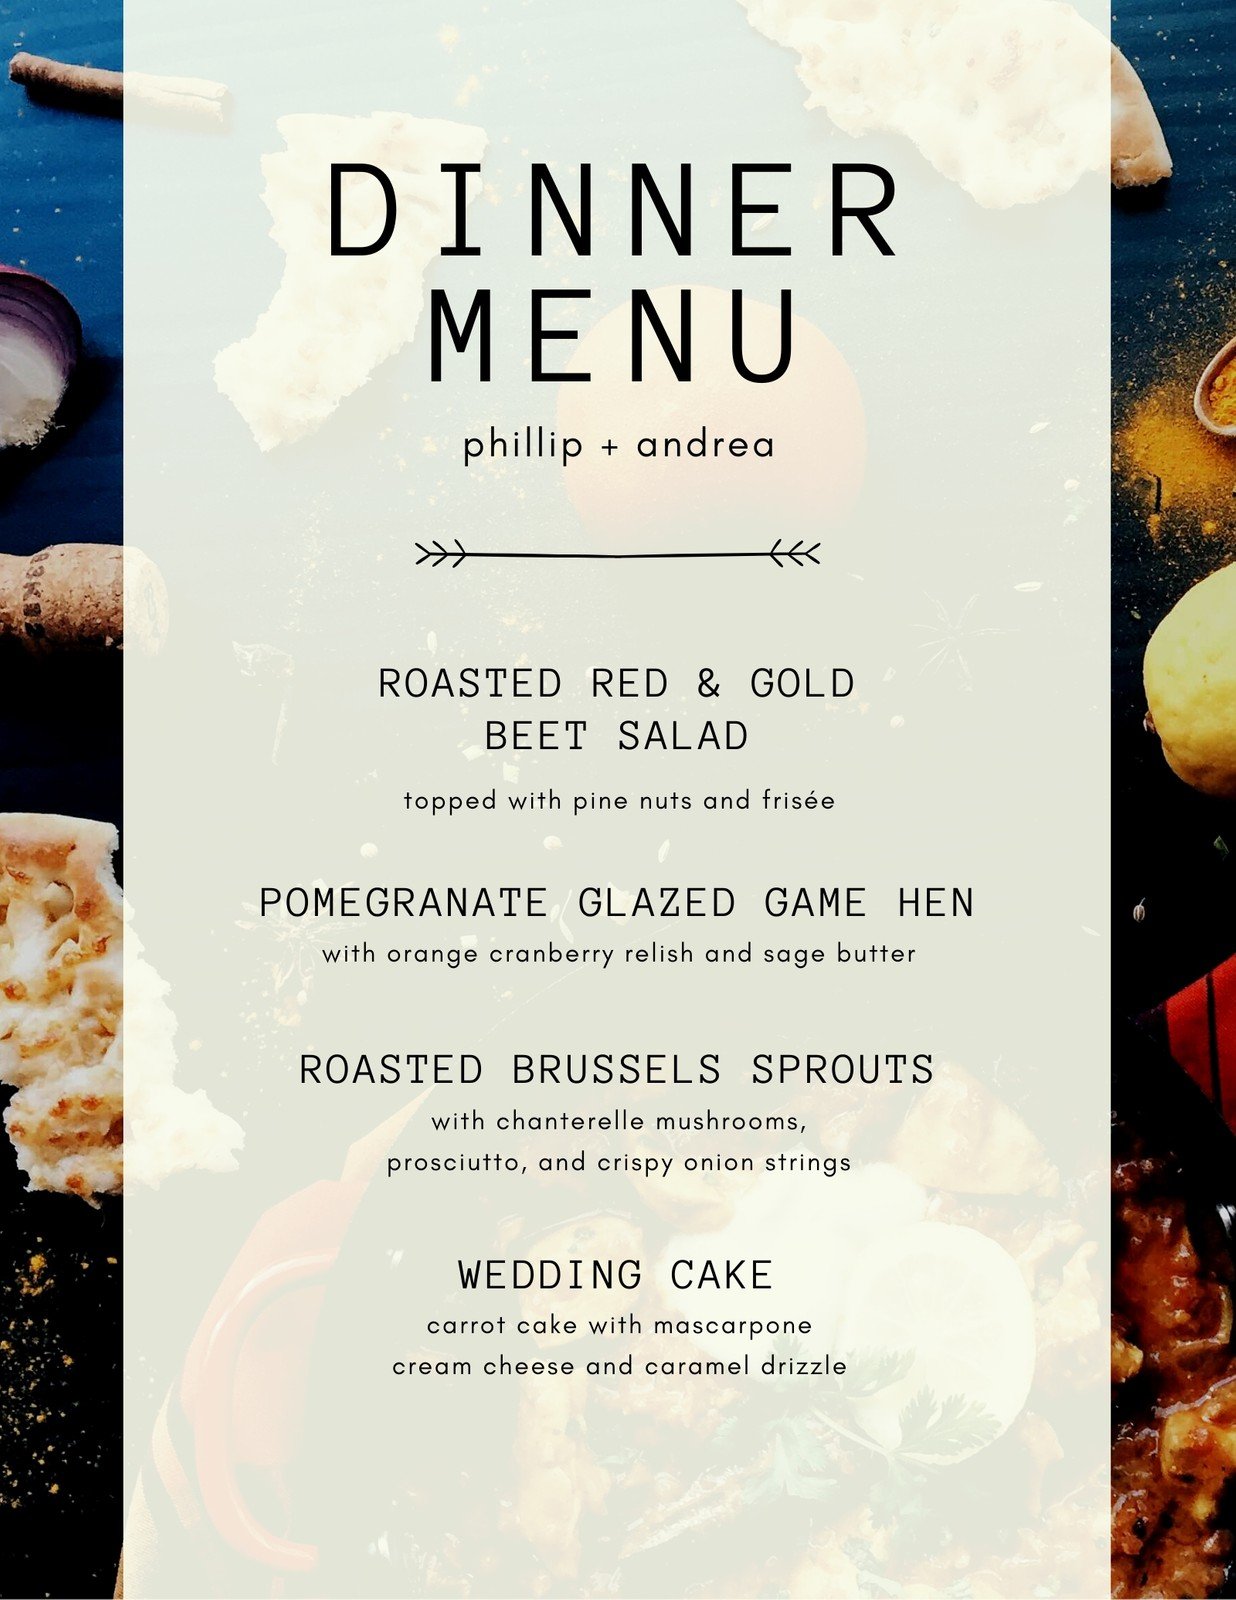 Free Printable And Customizable Dinner Party Menu Templates Canva